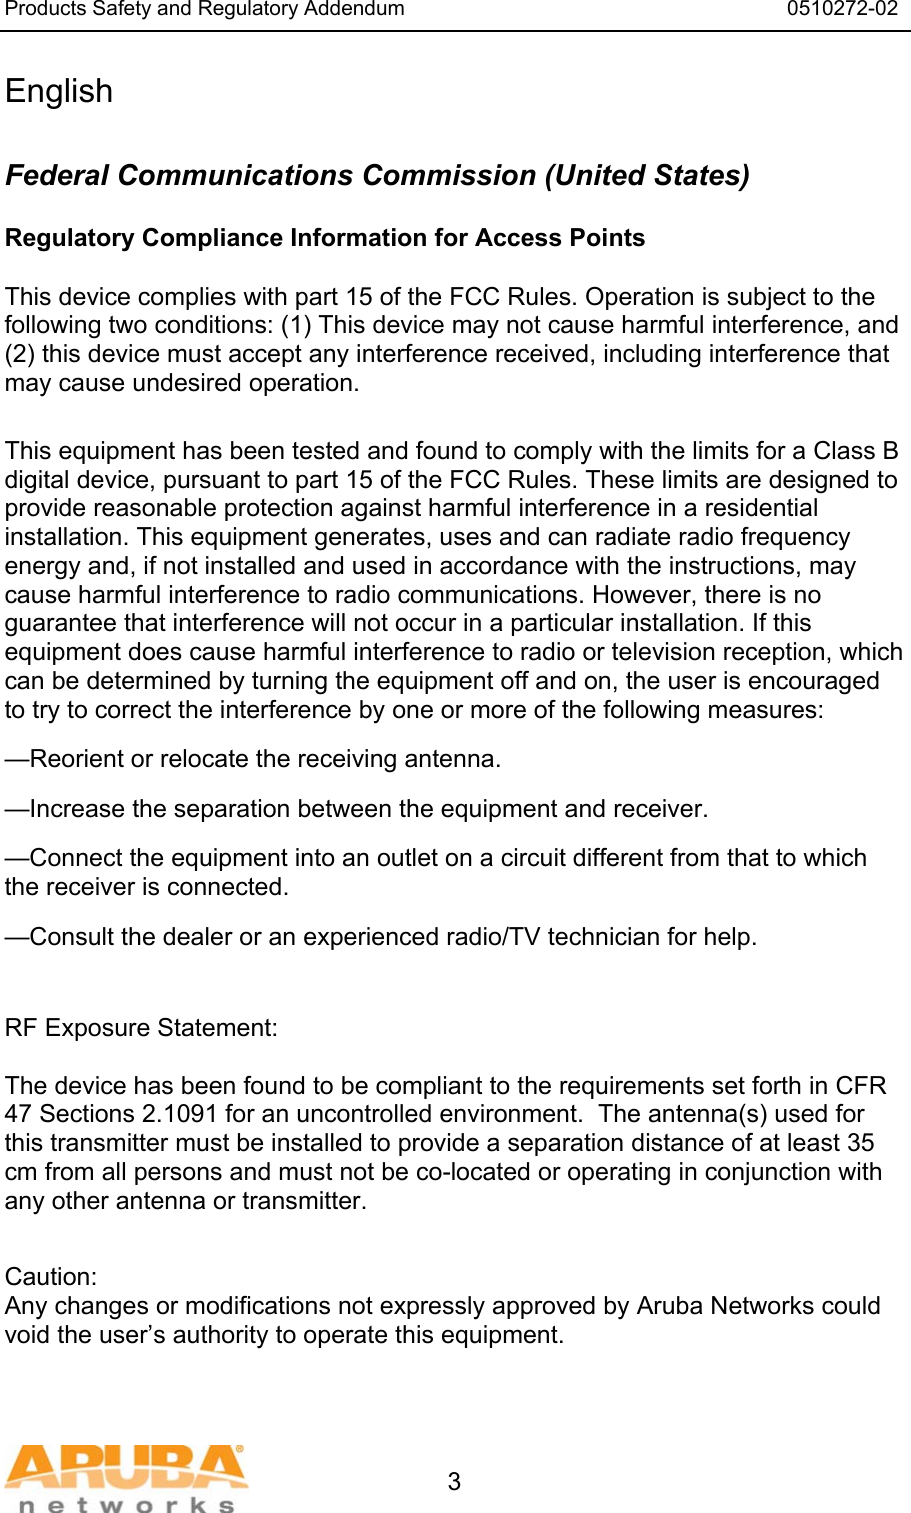 Products Safety and Regulatory Addendum                                                                  0510272-02   3 English  Federal Communications Commission (United States) Regulatory Compliance Information for Access Points    This device complies with part 15 of the FCC Rules. Operation is subject to the following two conditions: (1) This device may not cause harmful interference, and (2) this device must accept any interference received, including interference that may cause undesired operation.  This equipment has been tested and found to comply with the limits for a Class B digital device, pursuant to part 15 of the FCC Rules. These limits are designed to provide reasonable protection against harmful interference in a residential installation. This equipment generates, uses and can radiate radio frequency energy and, if not installed and used in accordance with the instructions, may cause harmful interference to radio communications. However, there is no guarantee that interference will not occur in a particular installation. If this equipment does cause harmful interference to radio or television reception, which can be determined by turning the equipment off and on, the user is encouraged to try to correct the interference by one or more of the following measures: —Reorient or relocate the receiving antenna. —Increase the separation between the equipment and receiver. —Connect the equipment into an outlet on a circuit different from that to which       the receiver is connected. —Consult the dealer or an experienced radio/TV technician for help.   RF Exposure Statement:  The device has been found to be compliant to the requirements set forth in CFR 47 Sections 2.1091 for an uncontrolled environment.  The antenna(s) used for this transmitter must be installed to provide a separation distance of at least 35 cm from all persons and must not be co-located or operating in conjunction with any other antenna or transmitter.   Caution: Any changes or modifications not expressly approved by Aruba Networks could void the user’s authority to operate this equipment.   